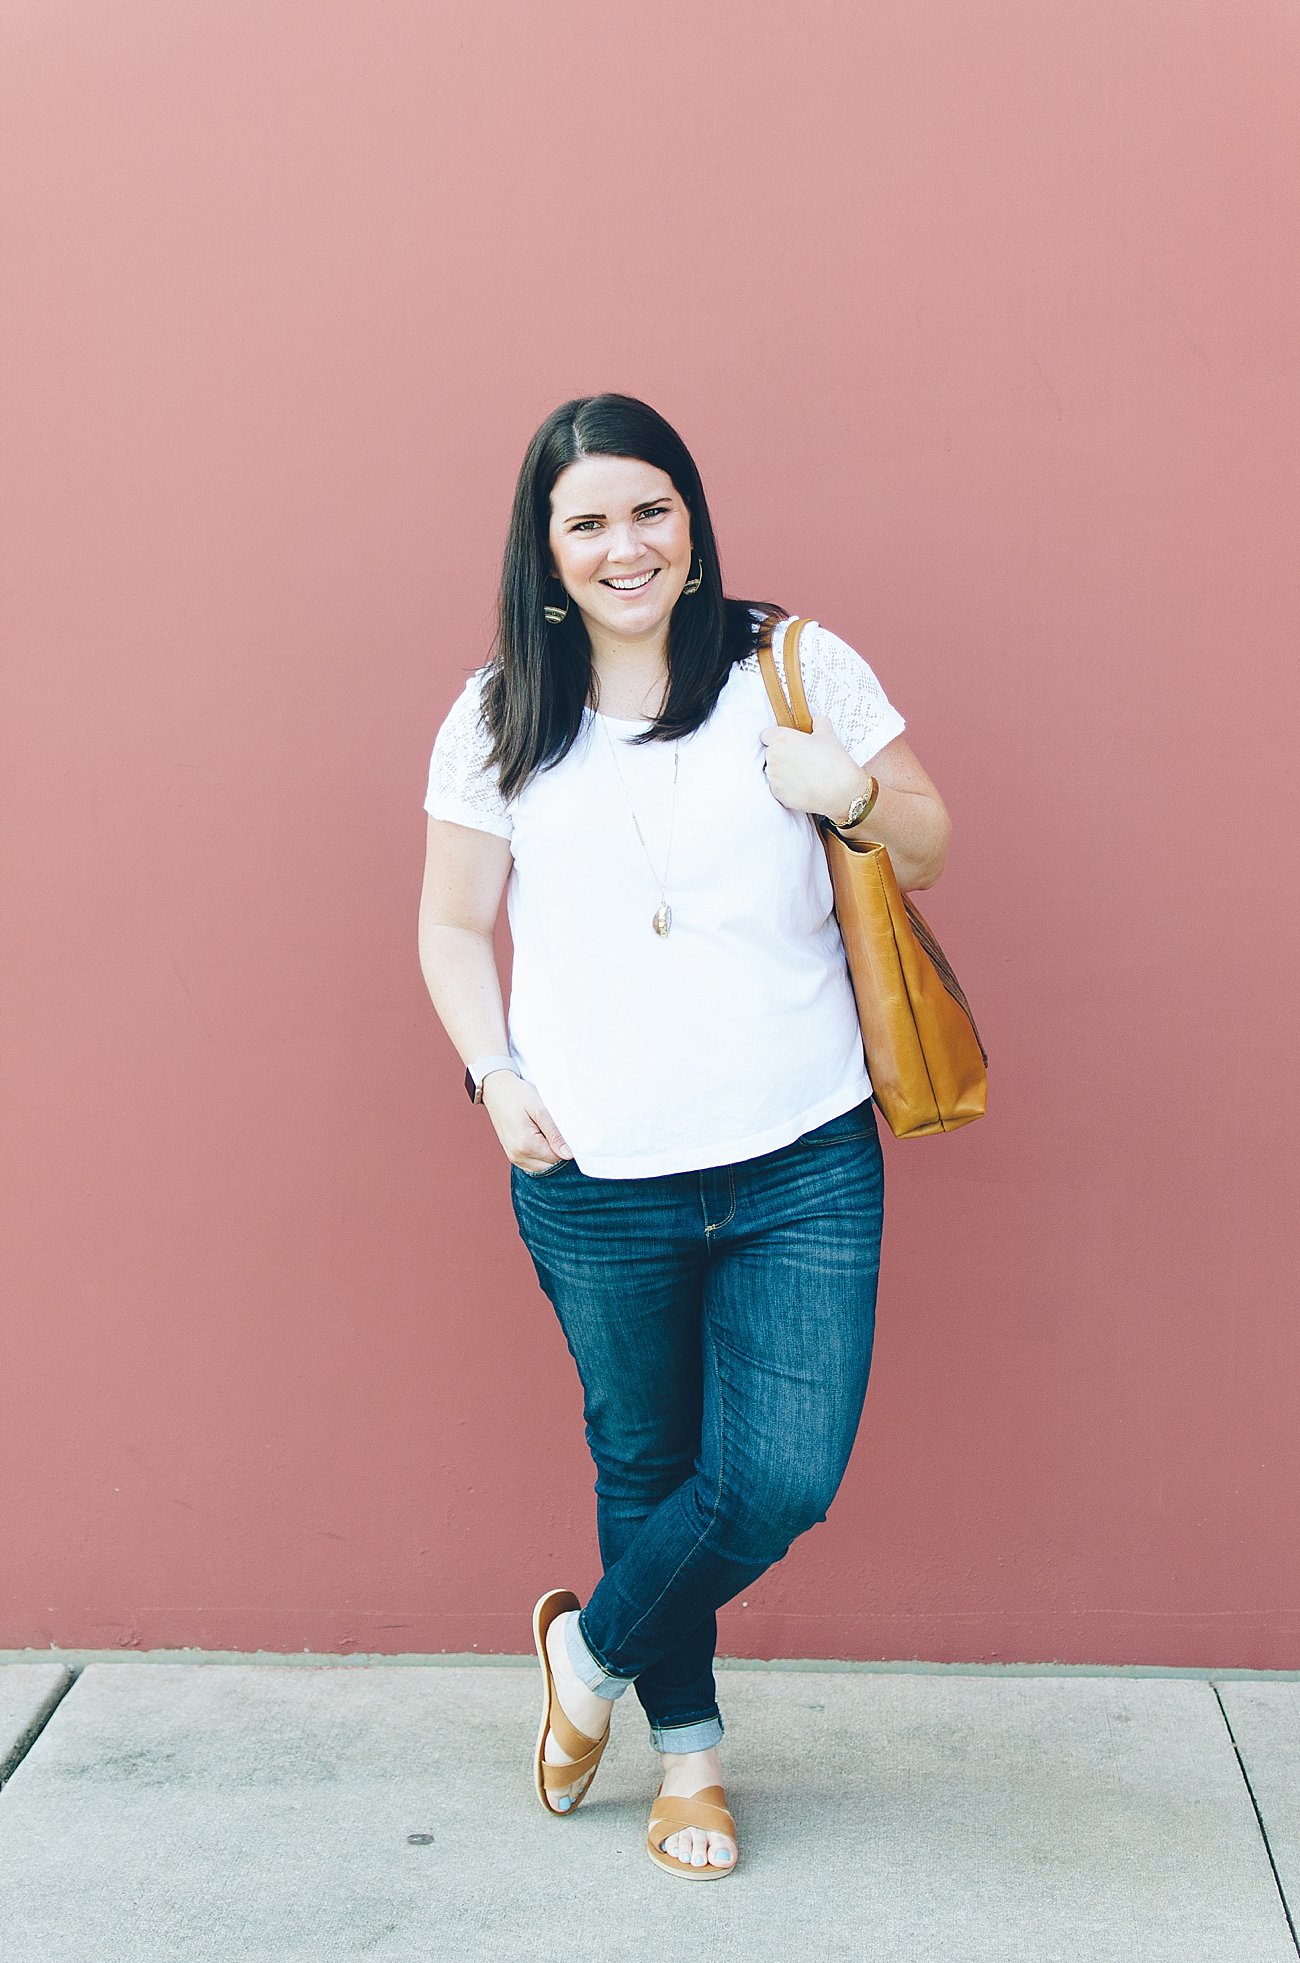 Aventura clothing lace detail tee, PAIGE denim jeans, Purpose Jewelry, Starfish Project, Sseko Designs, ethical fashion - casual fair trade style (7) - How to Elevate Your Basic White TShirt and Jeans Outfit by fashion blogger Still Being Molly